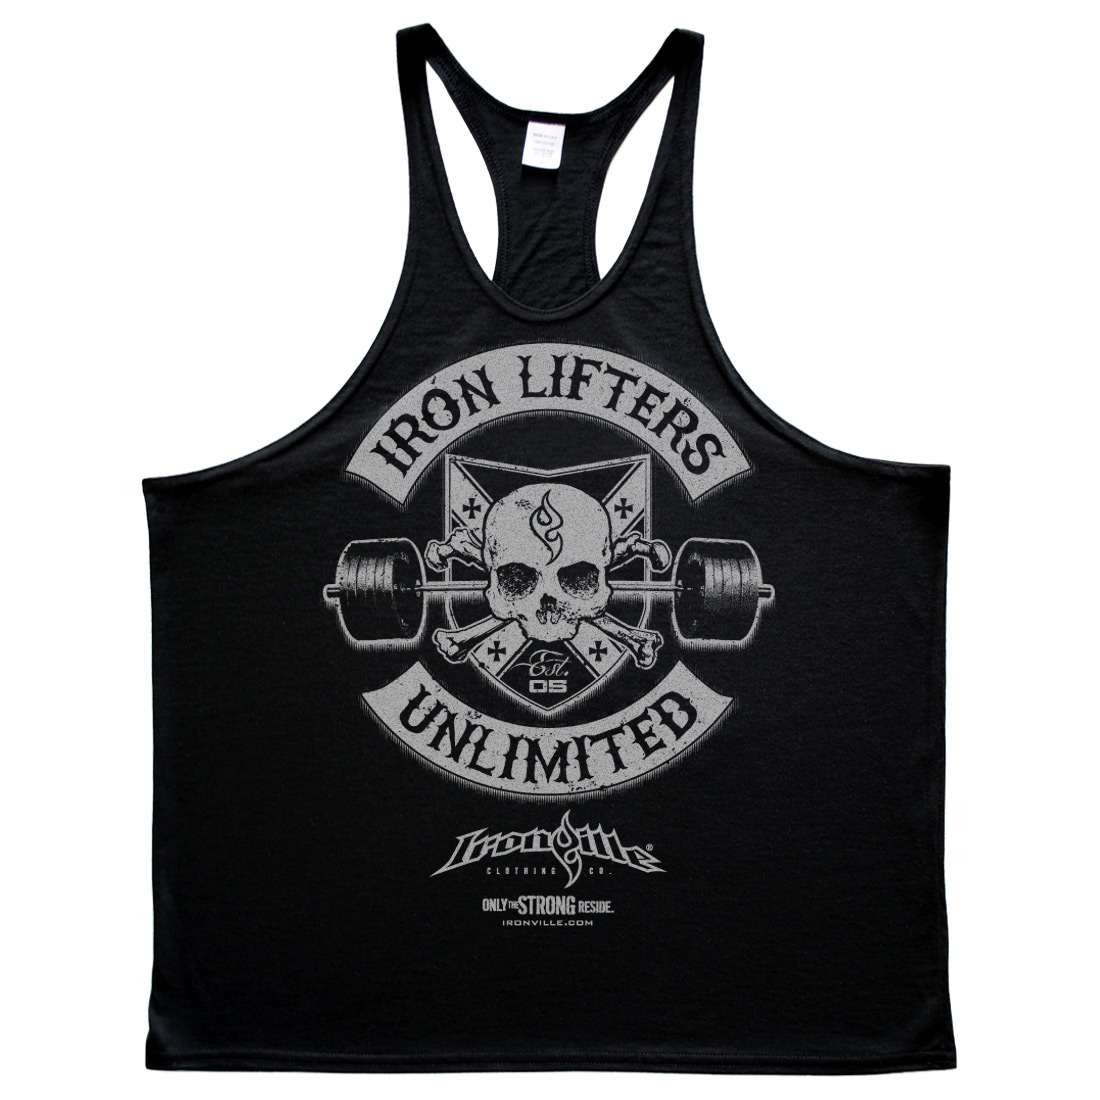 https://www.ironville.com/wp-content/uploads/2015/08/iron-lifters-unlimited-skull-barbell-weightlifting-stringer-tank-top-black.jpg